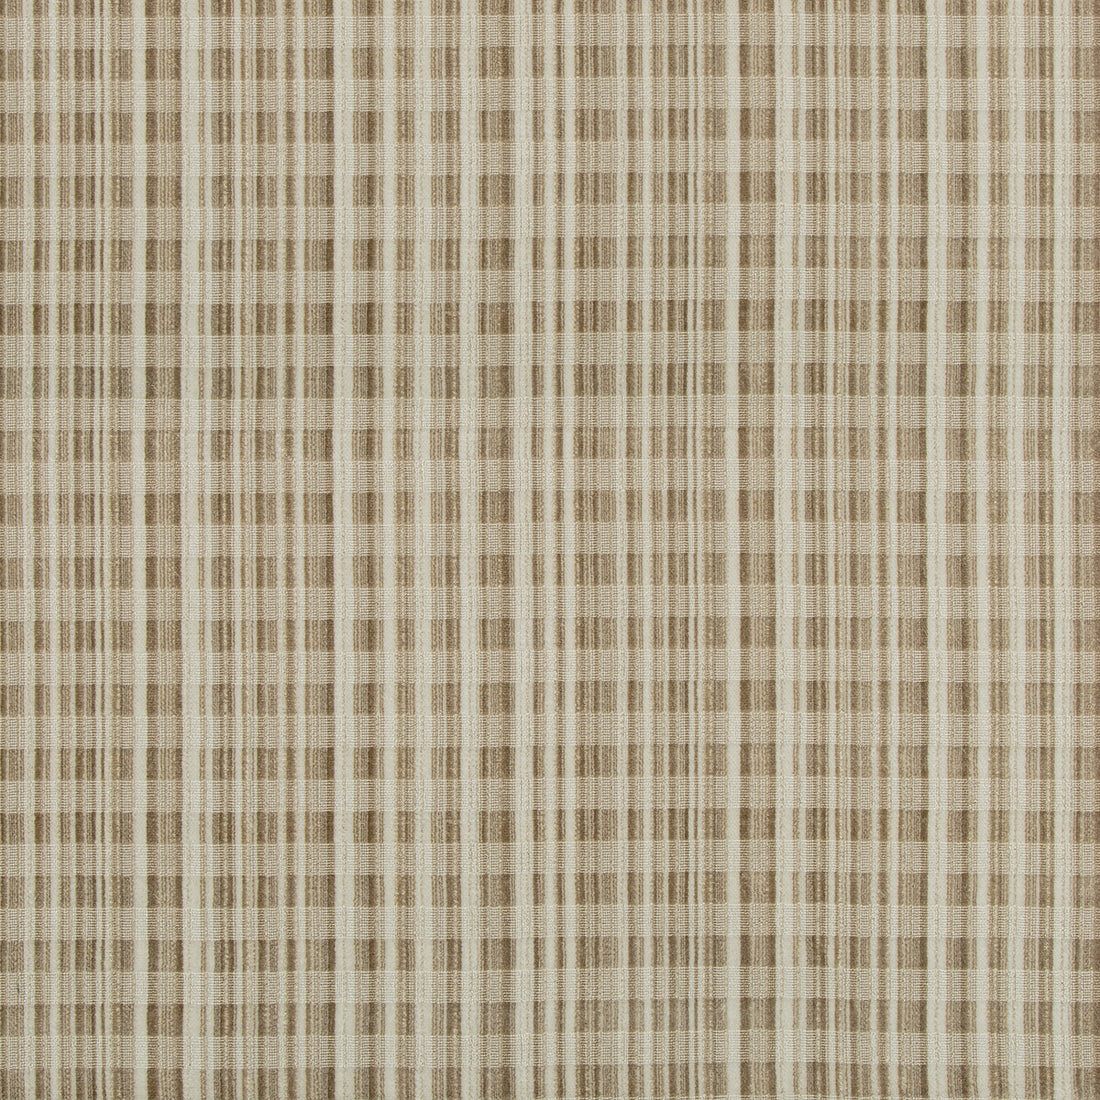 Resource Velvet fabric in sand color - pattern 35376.16.0 - by Kravet Design in the Nate Berkus Well-Traveled collection